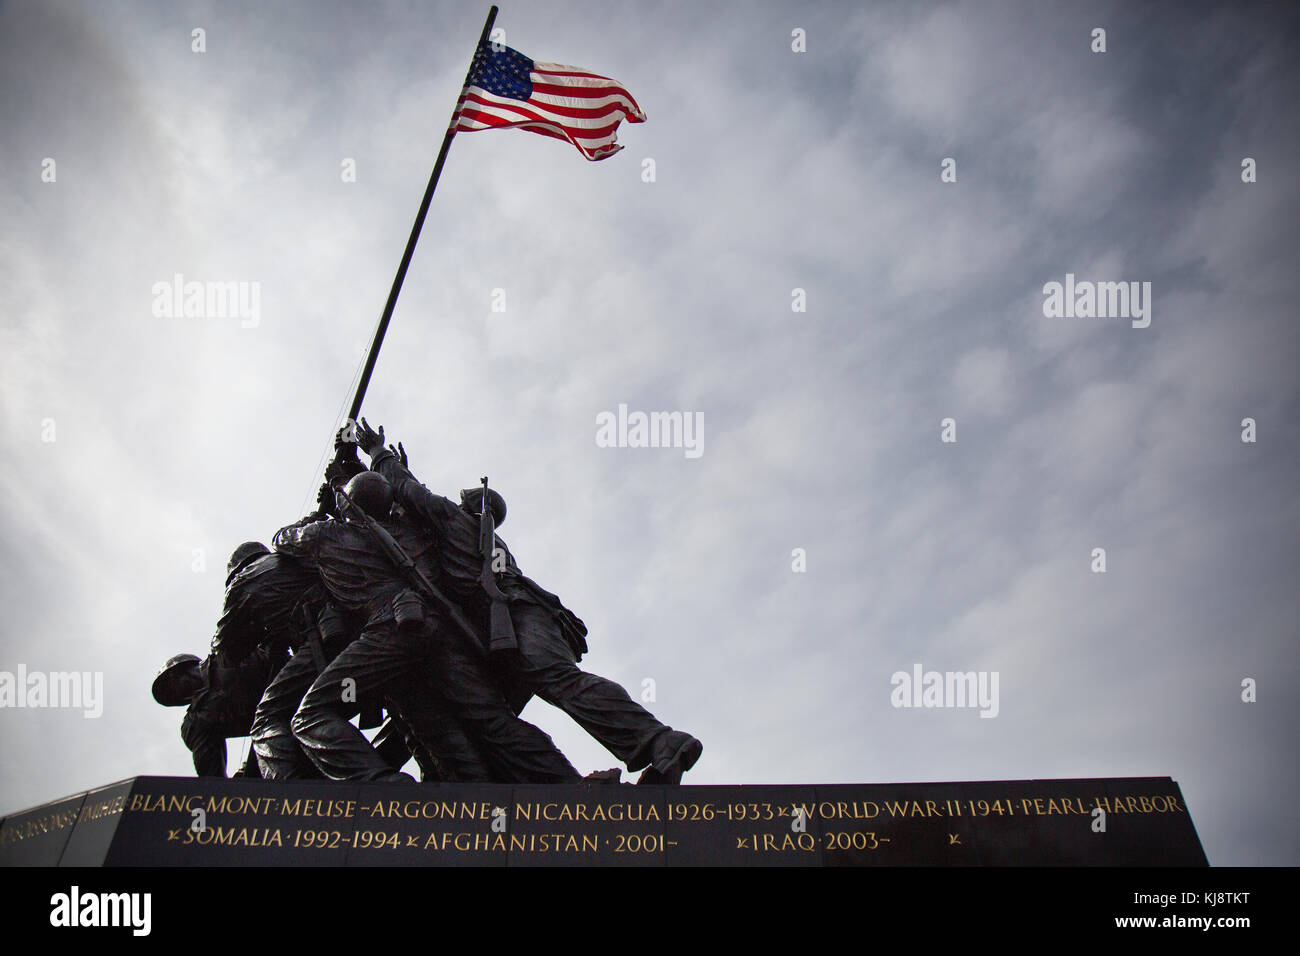 The National Park Service unveiled new engravings on the Marine Corps War Memorial in Arlington, Va. Nov. 11, 2017. The Afghanistan and Iraq engraving Stock Photo